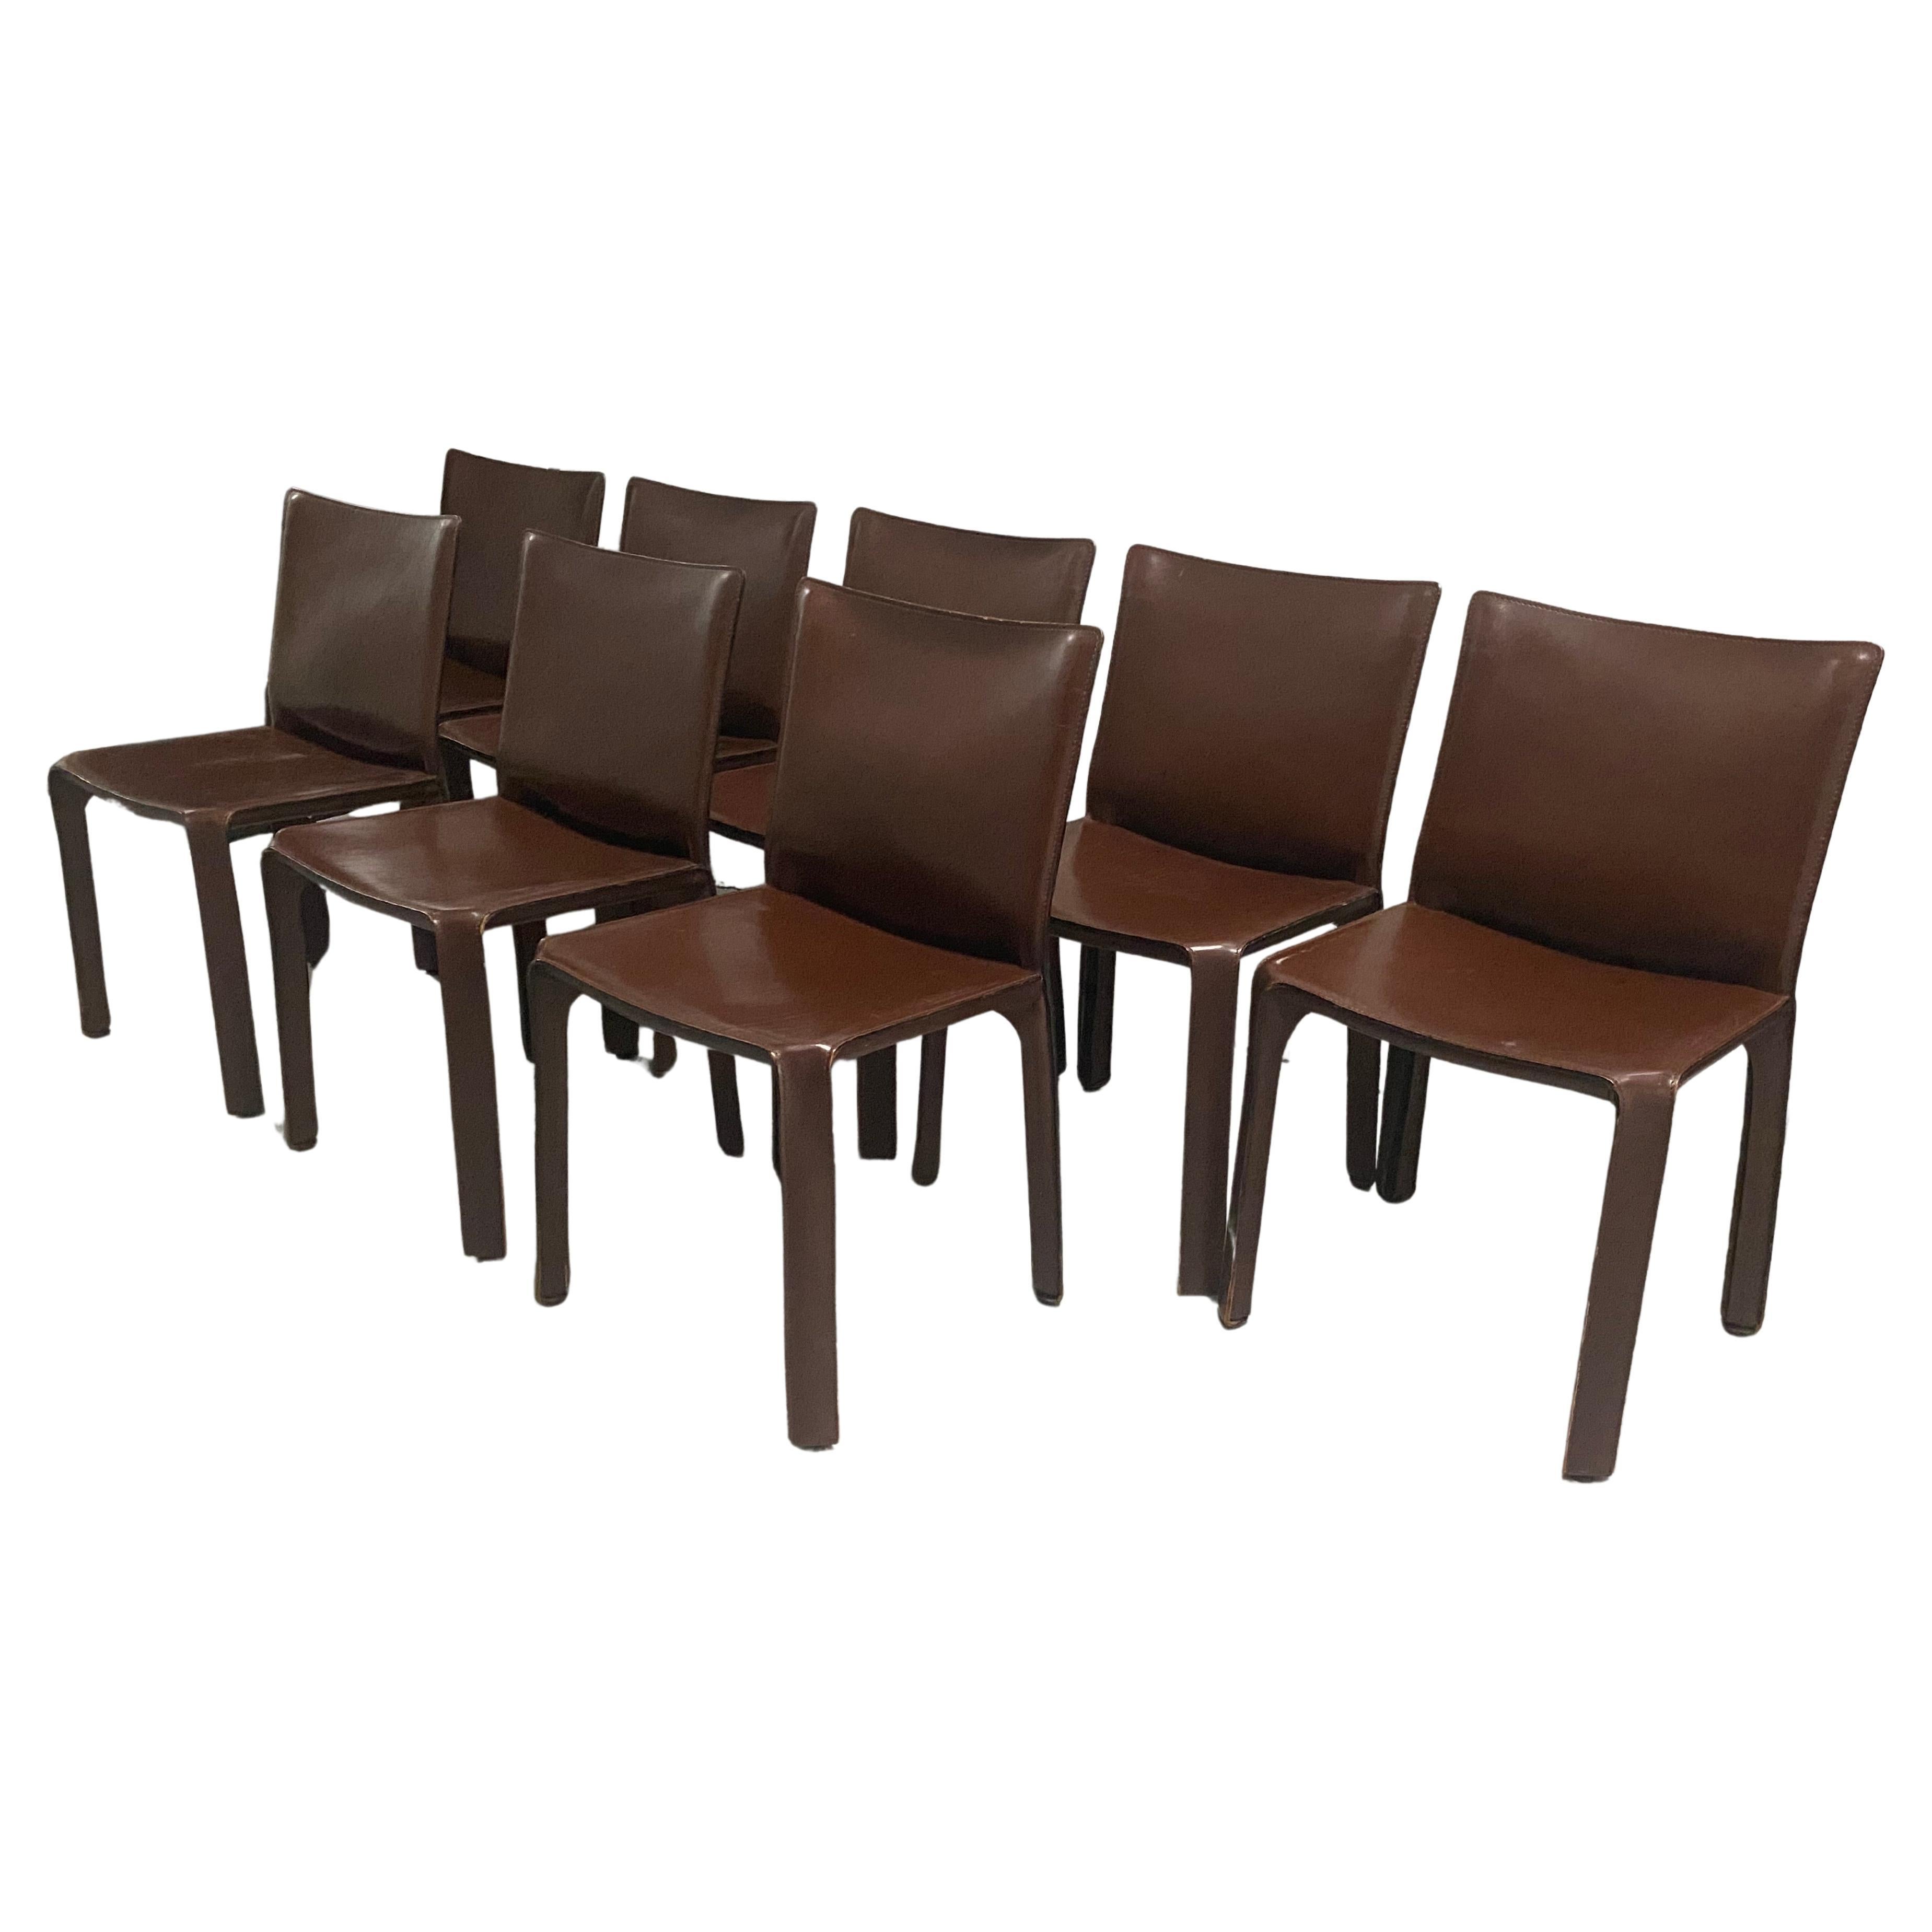 Set of Four Cassina Cab Leather Chairs by Mario Bellini For Sale